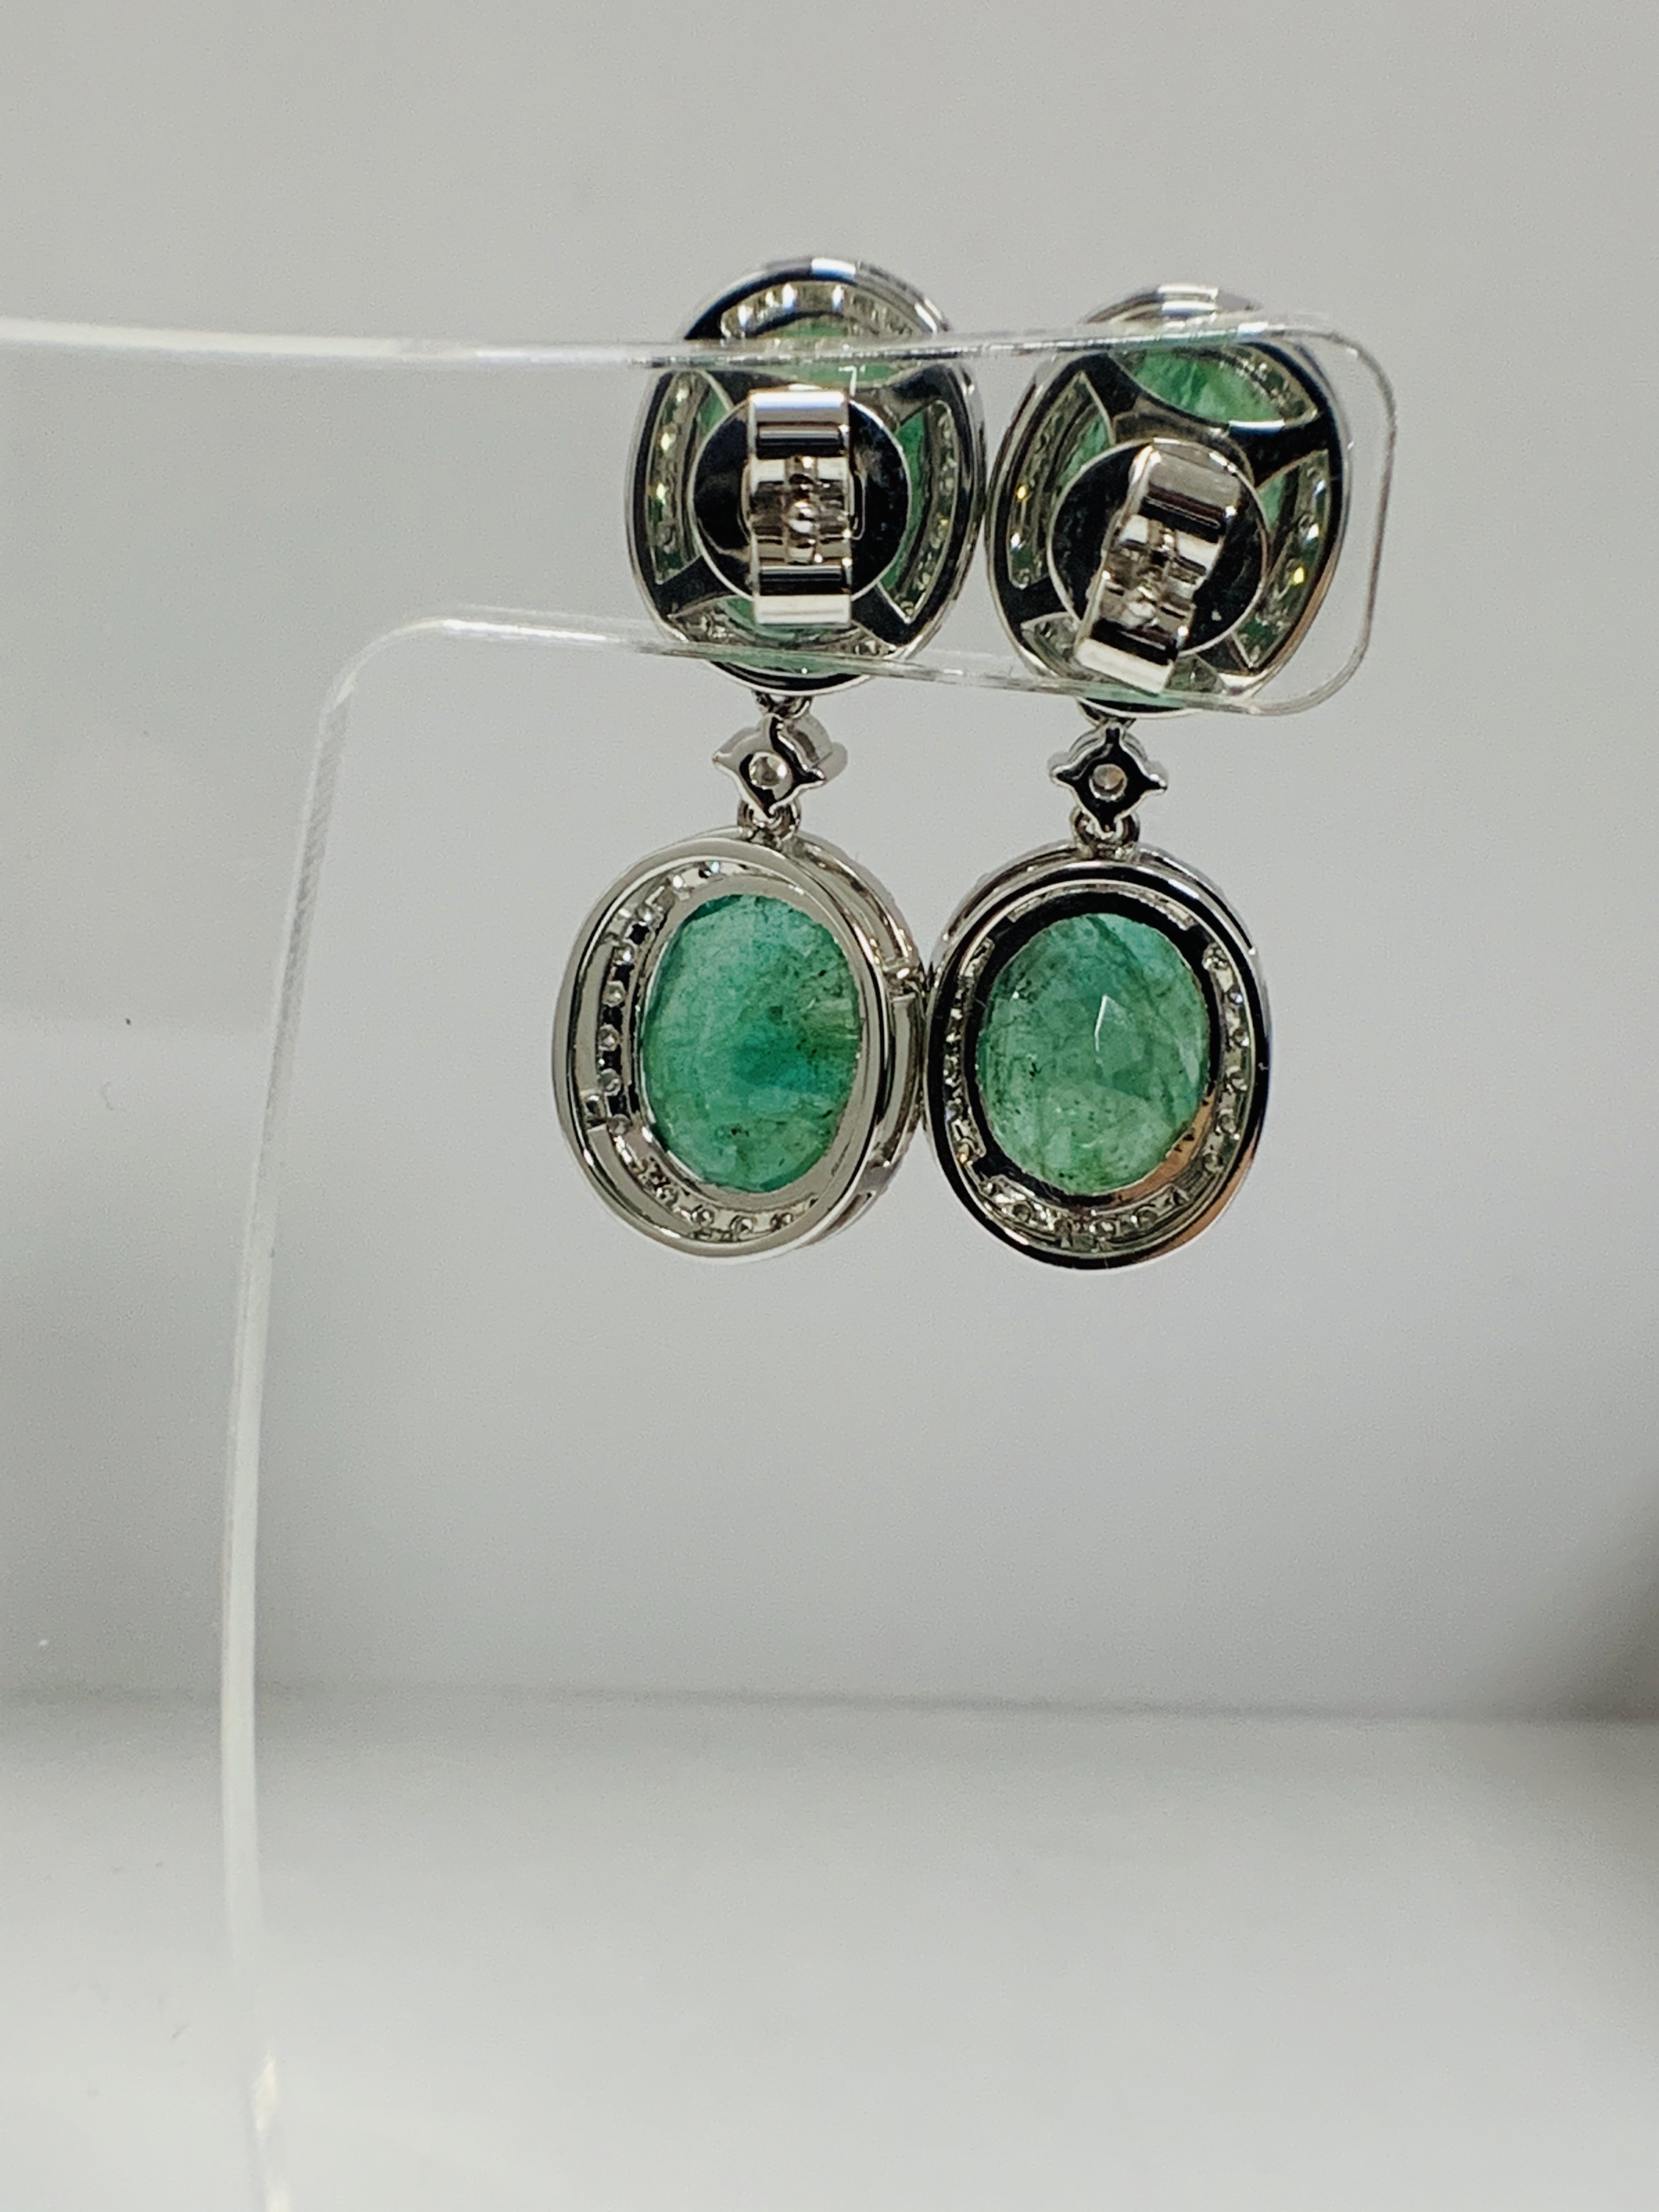 14ct White and Yellow Gold Emerald and Diamond drop earrings featuring, 4 oval cut, medium green Eme - Image 15 of 17